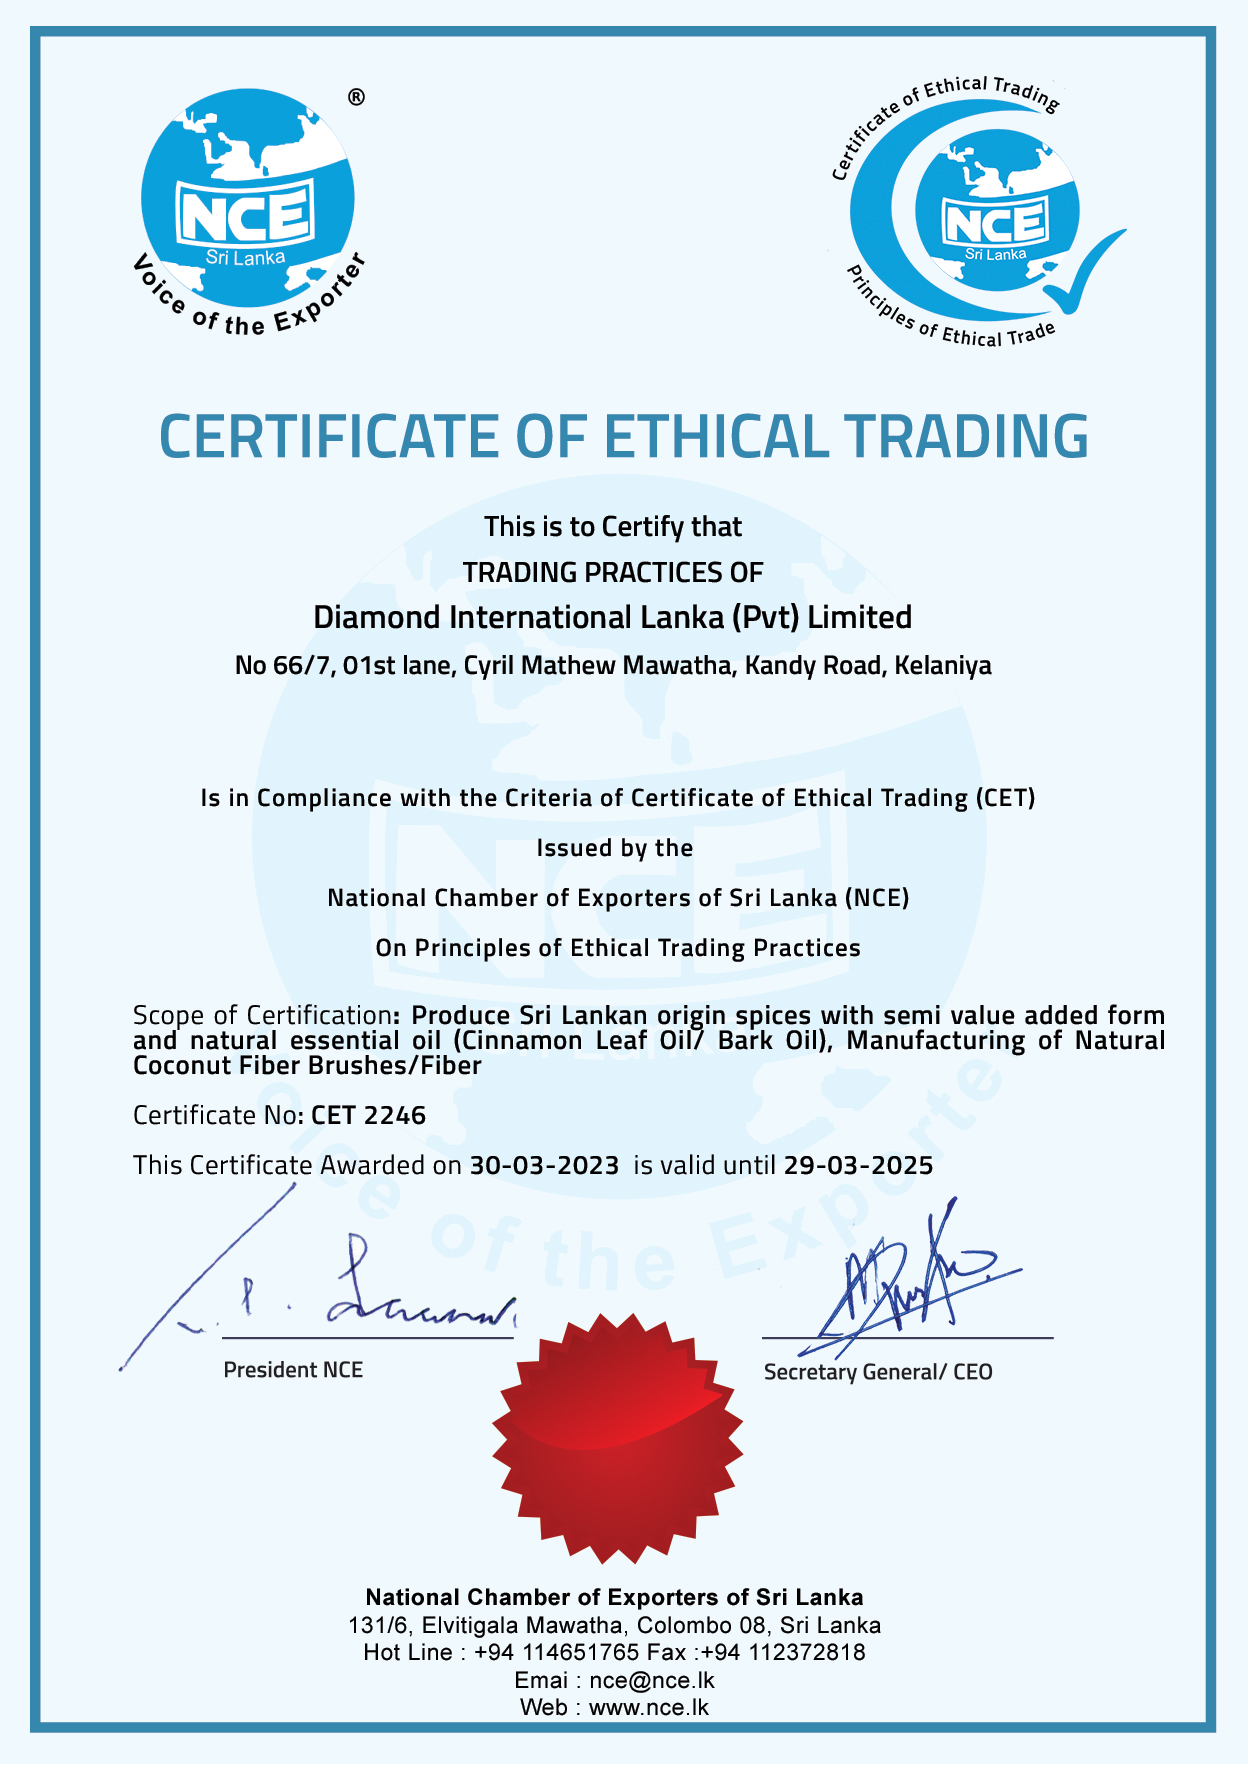 Certificate of Ethical Trading (CET) - National Chamber of Exporters of Sri Lanka